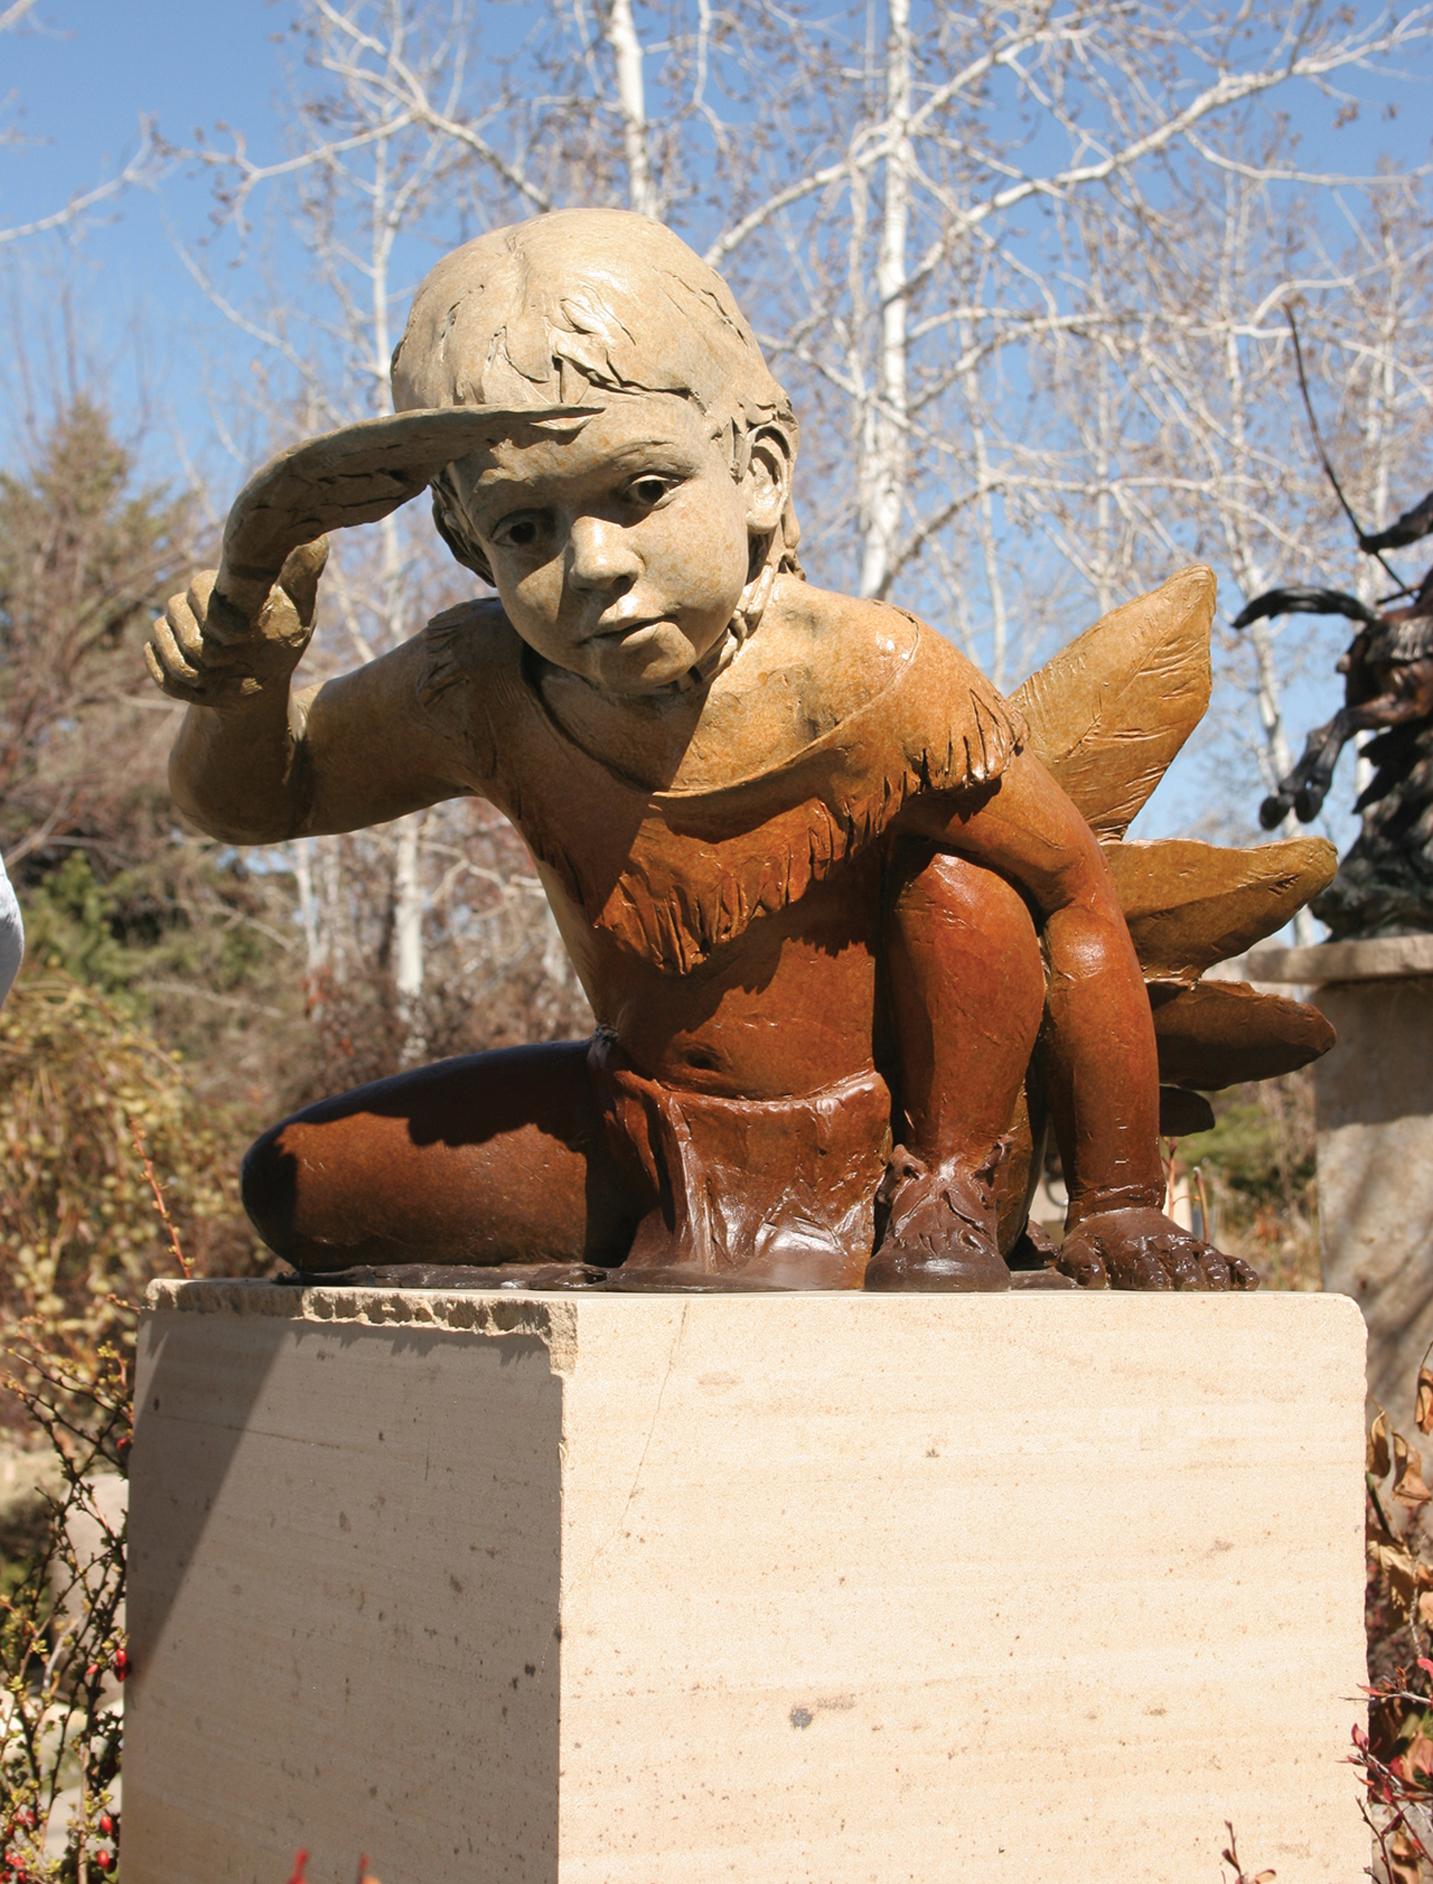 Start of the Dance by Denny Haskew
Figurative Bronze of a young Native American Boy at Pow Wow
21x22x30